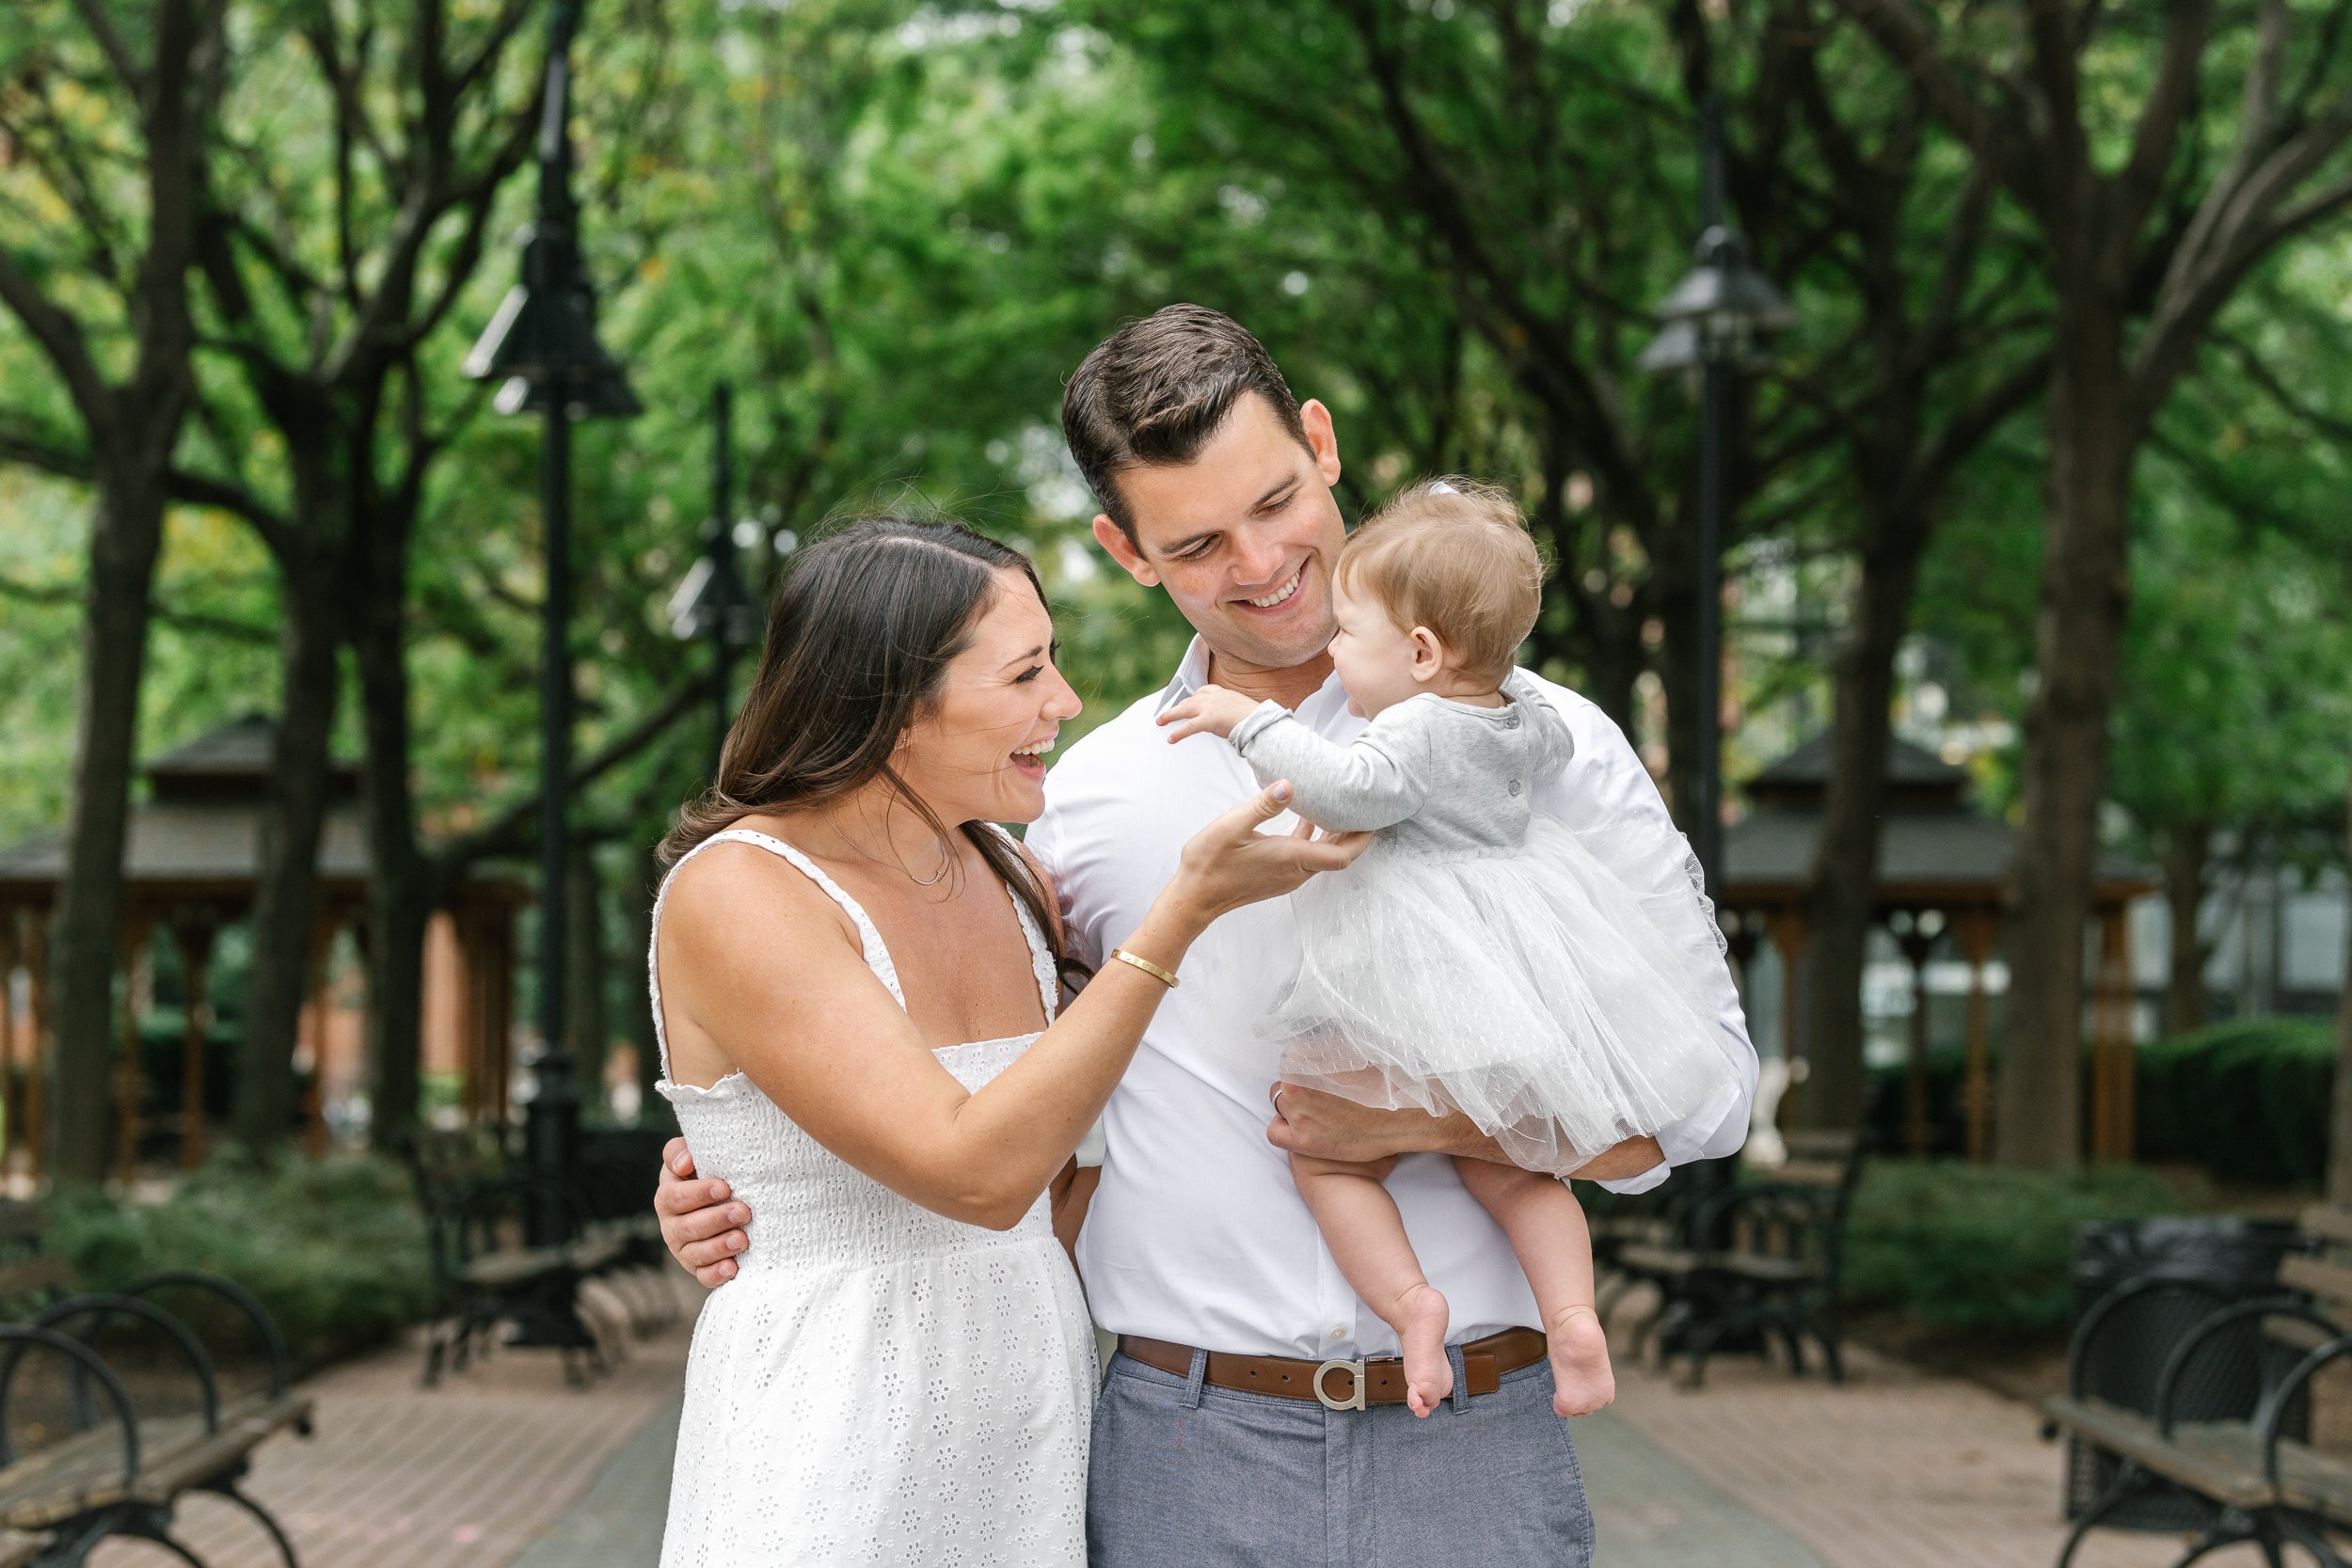  Nicole Hawkins Photography captures a baby girl with her mother in father in a Hoboken park. men's family attire ideas New Jersey family pics #nicolehawkinsphotography #newjerseyphotographers #familyphotographer #6monthportraits #NJfamilyphotos 